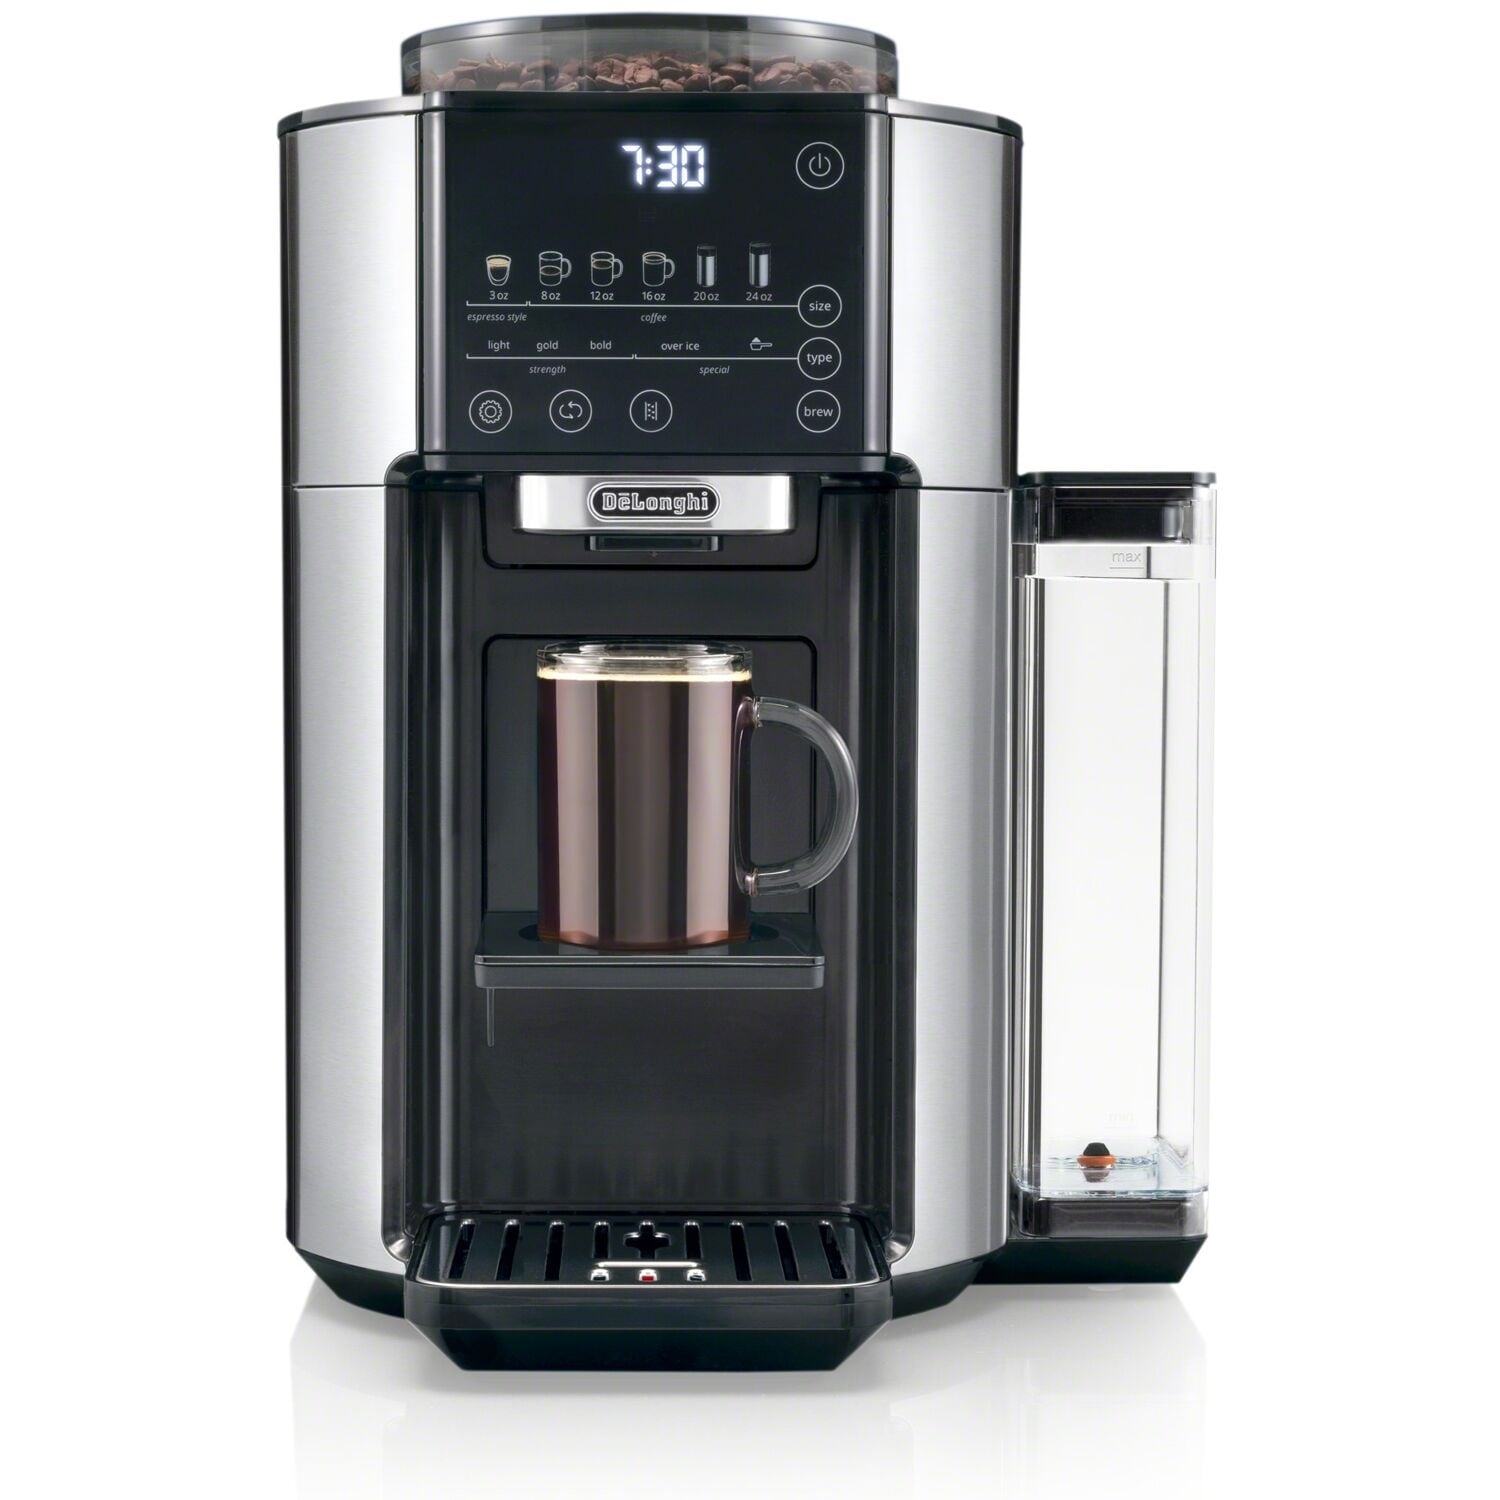 https://ak1.ostkcdn.com/images/products/is/images/direct/ed81b69328b7009488aa053a0bfe966e8751d1b0/DeLonghi-TrueBrew-Automatic-Single-Serve-Drip-Coffee-Maker-with-Built-In-Grinder-and-Bean-Extract-Technology.jpg